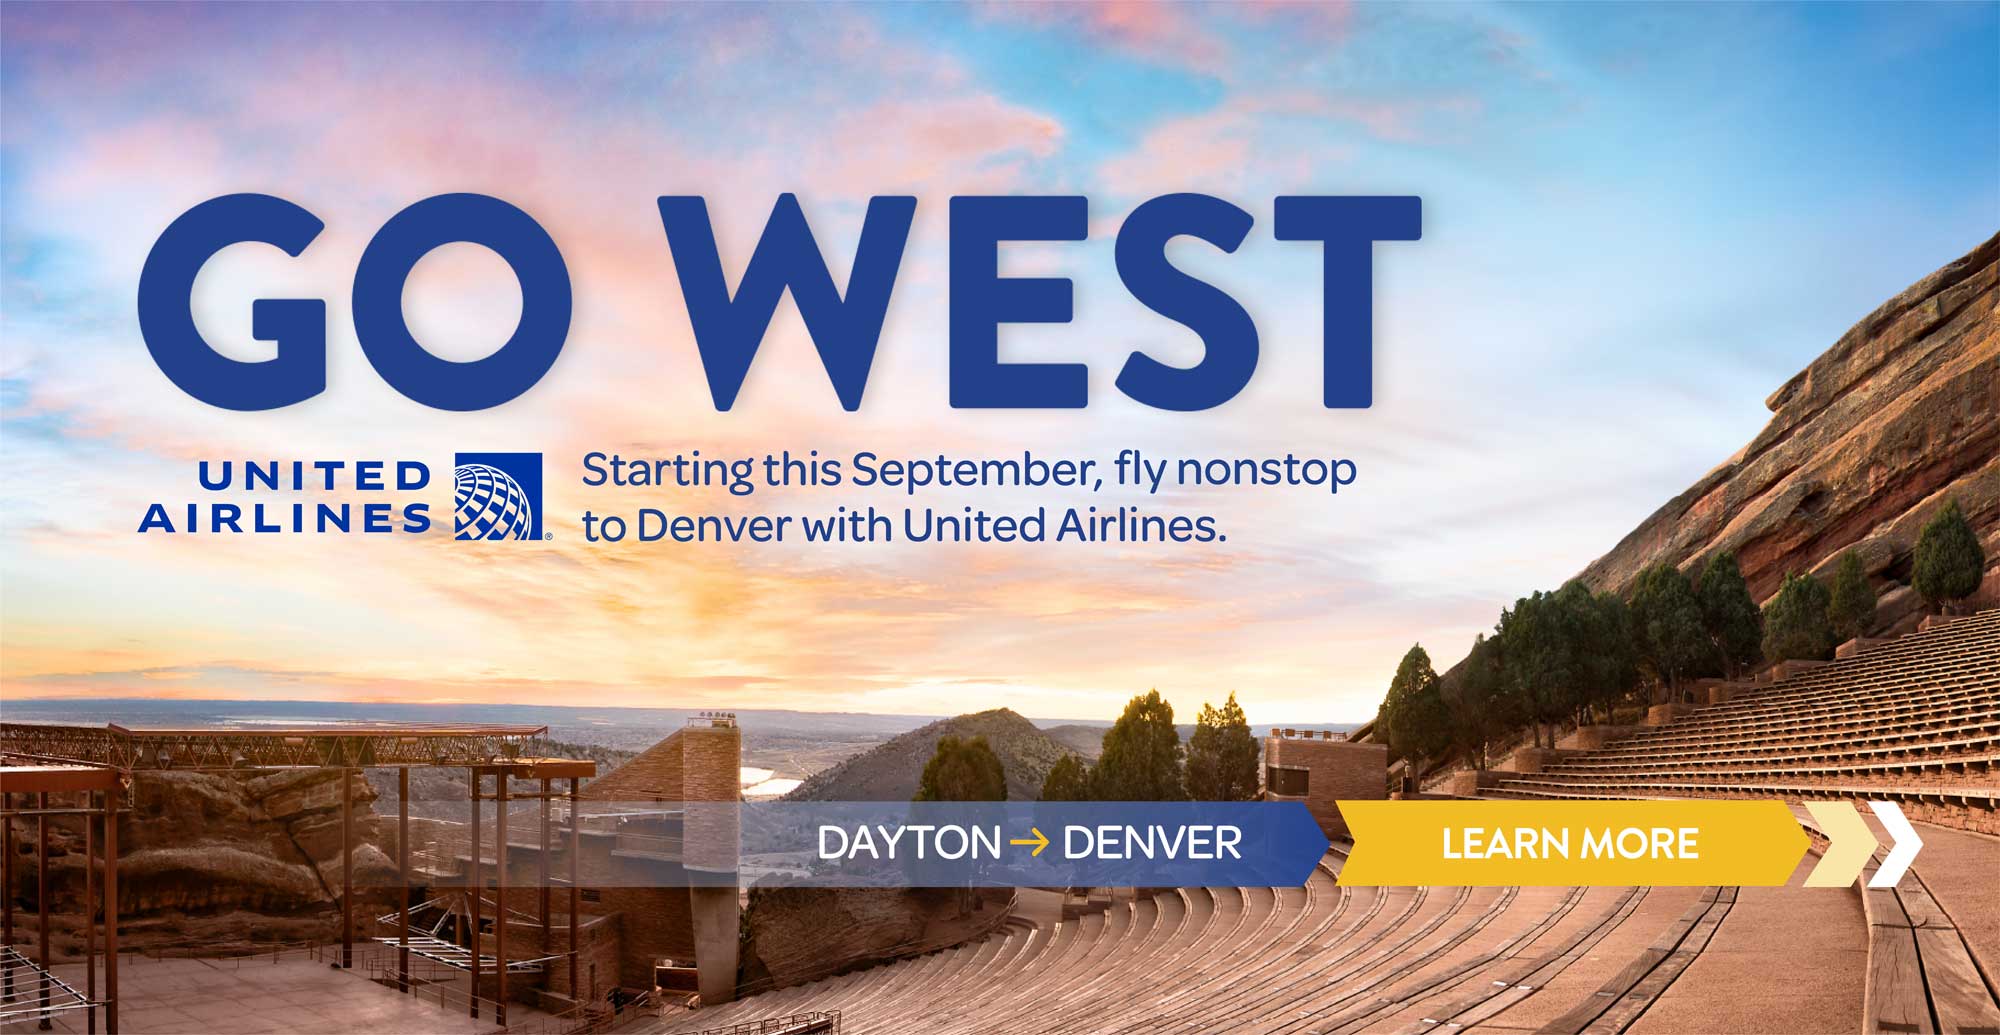 Starting this September, fly nonstop to Denver with United Airlines.